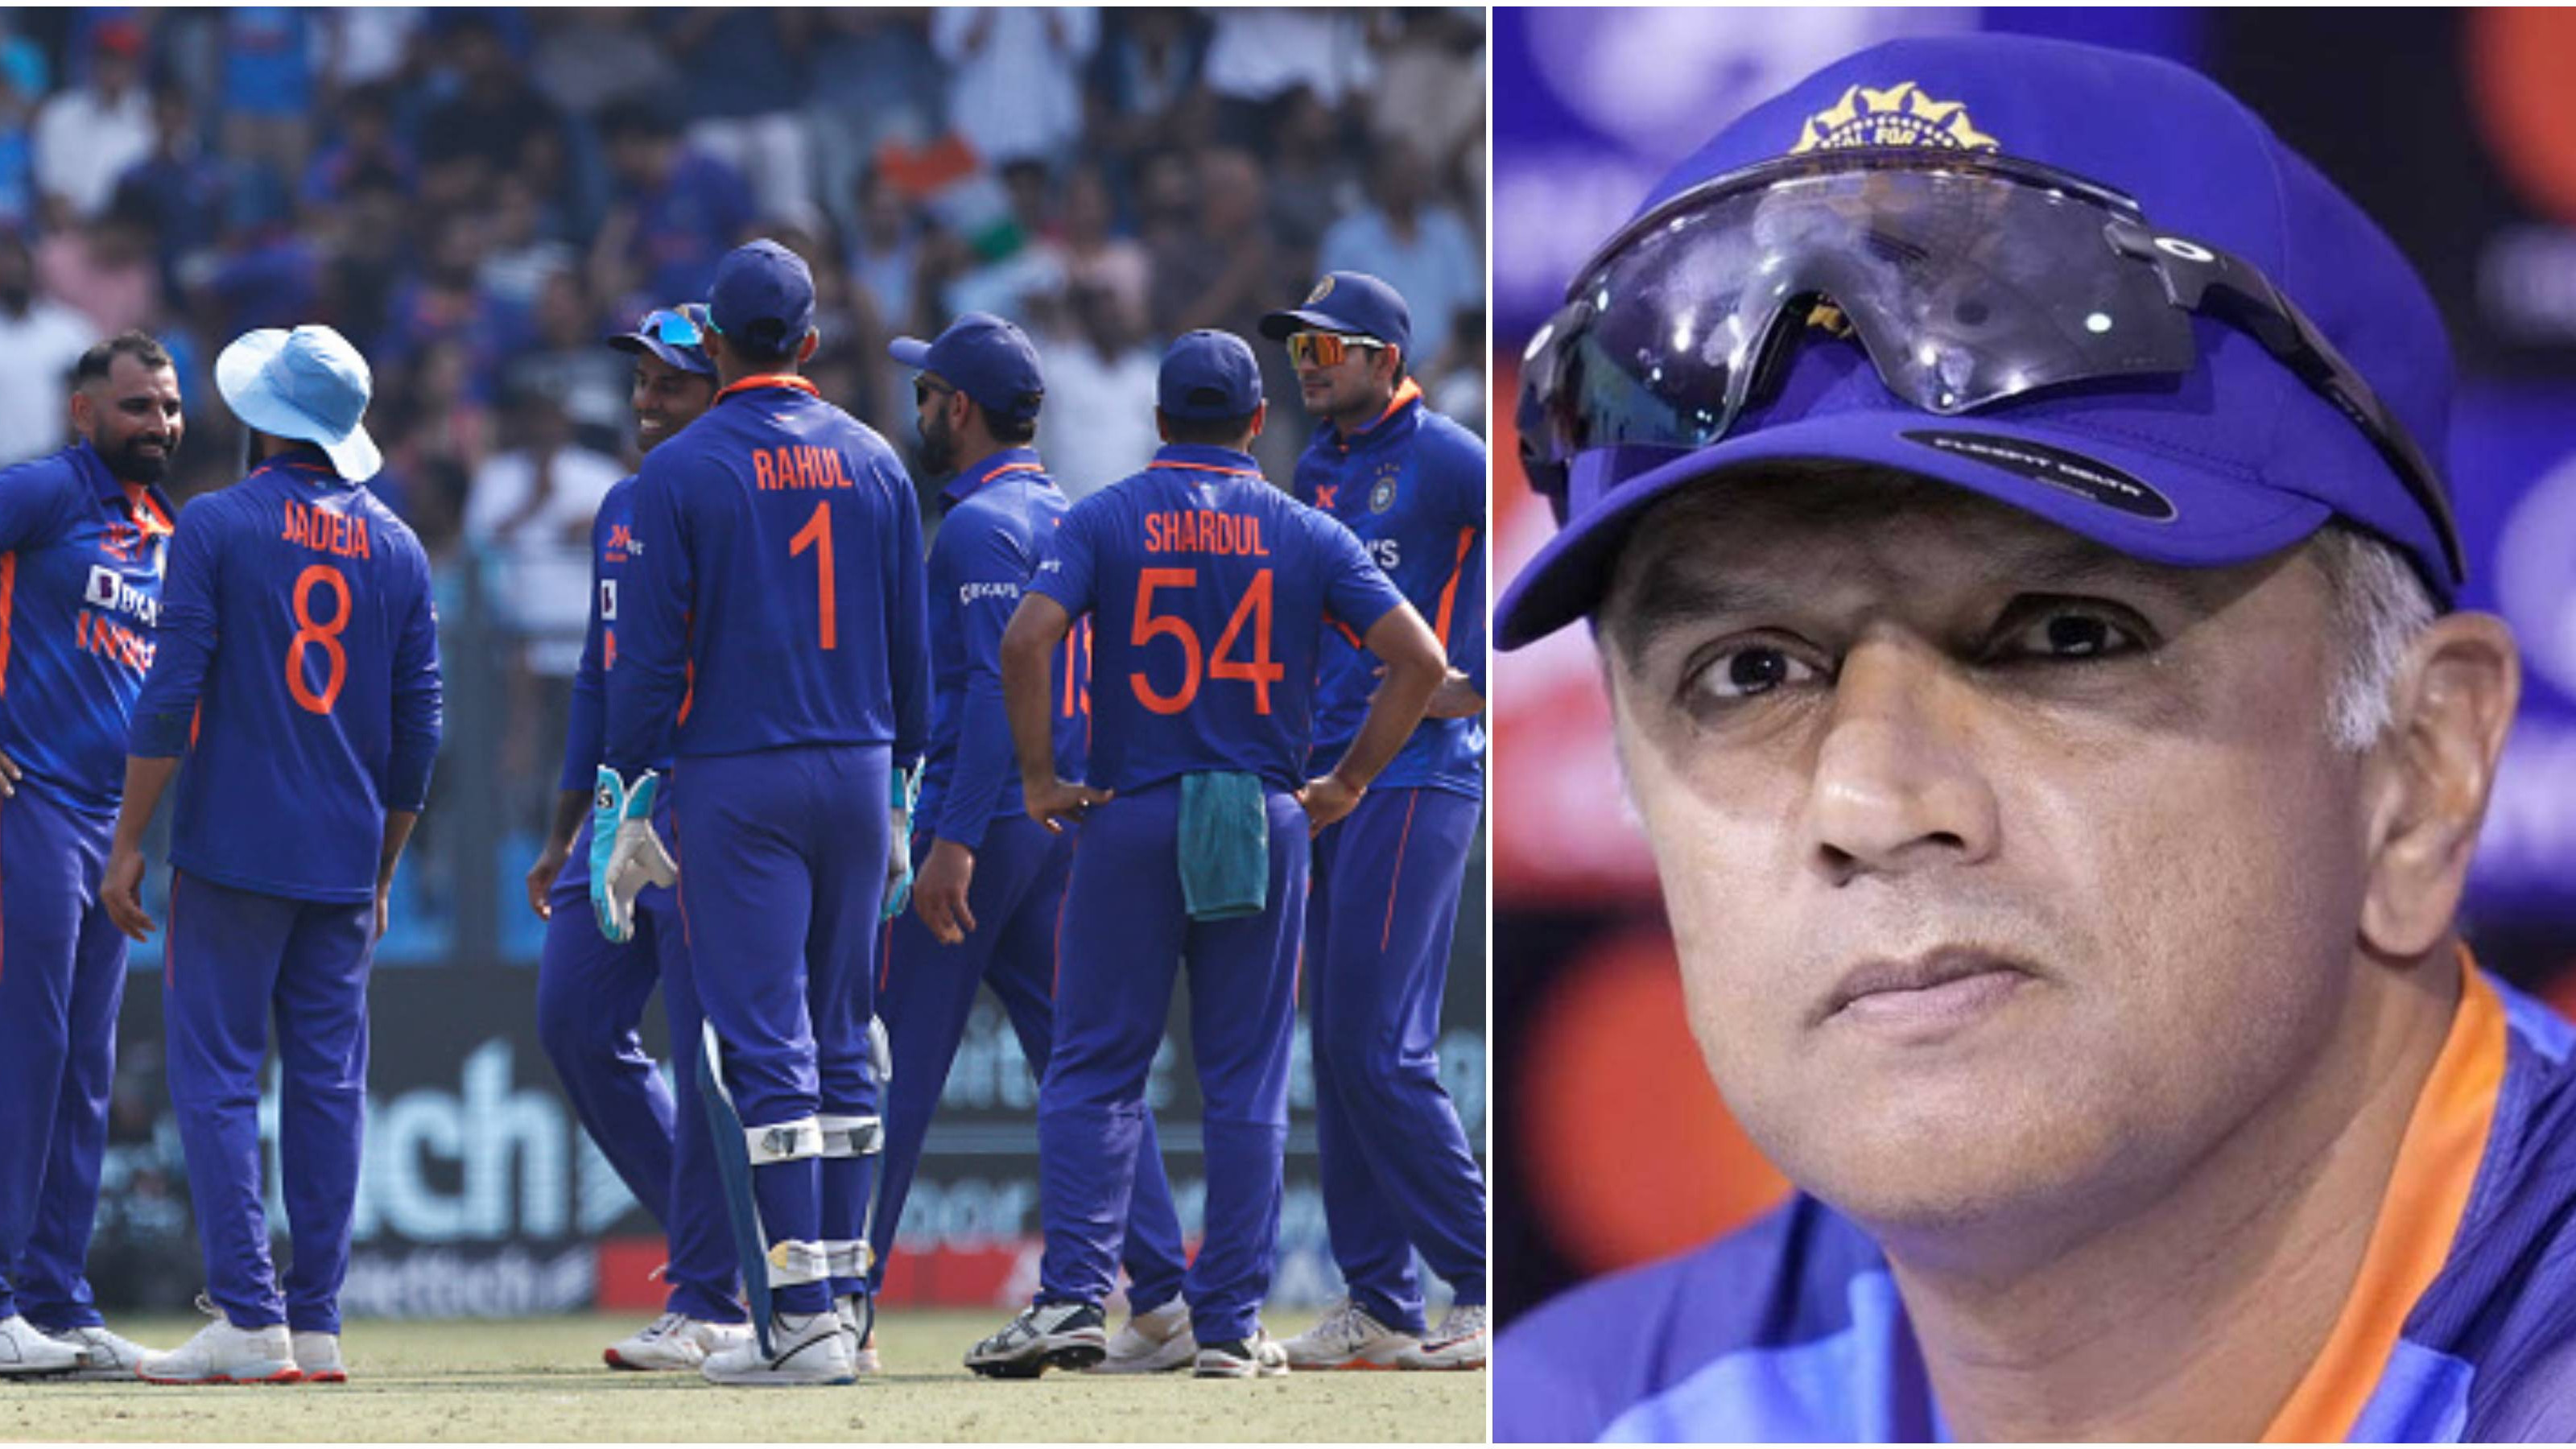 IND v AUS 2023: “We have narrowed it down to 17-18 players,” Rahul Dravid opens up on India’s World Cup preparations